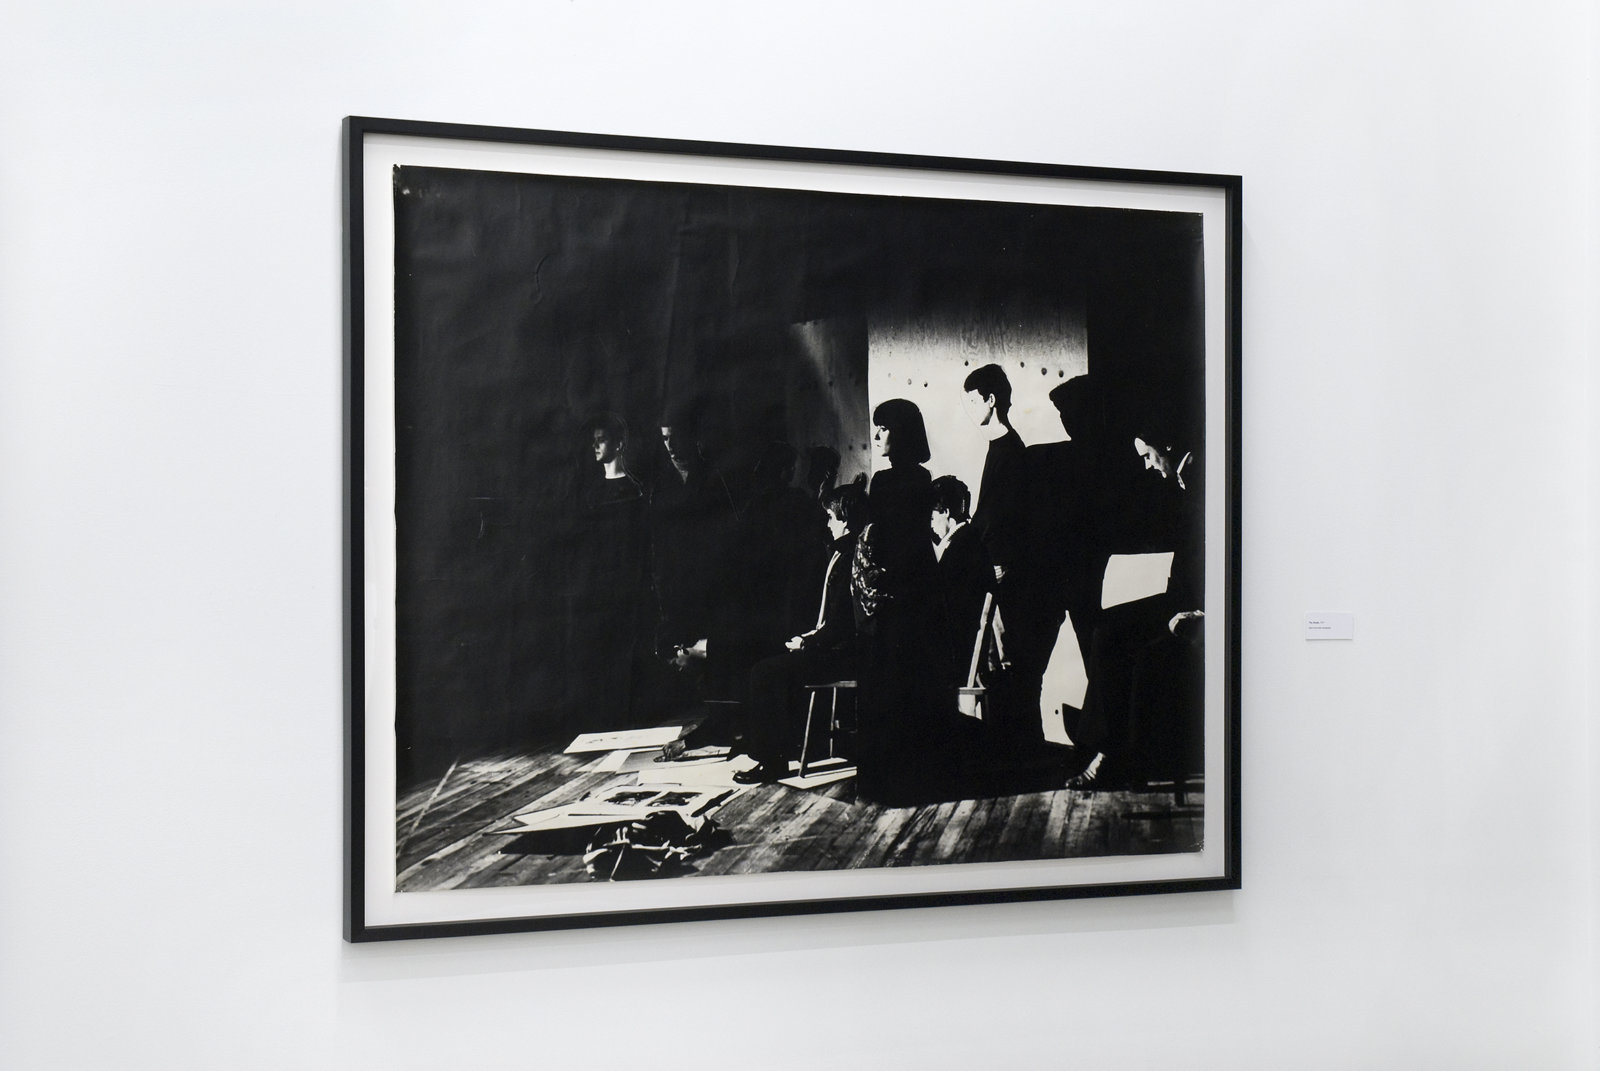 Ian Wallace, The Studio, 1977, black and white photograph 45 x 57 in. (113 x 145 cm)